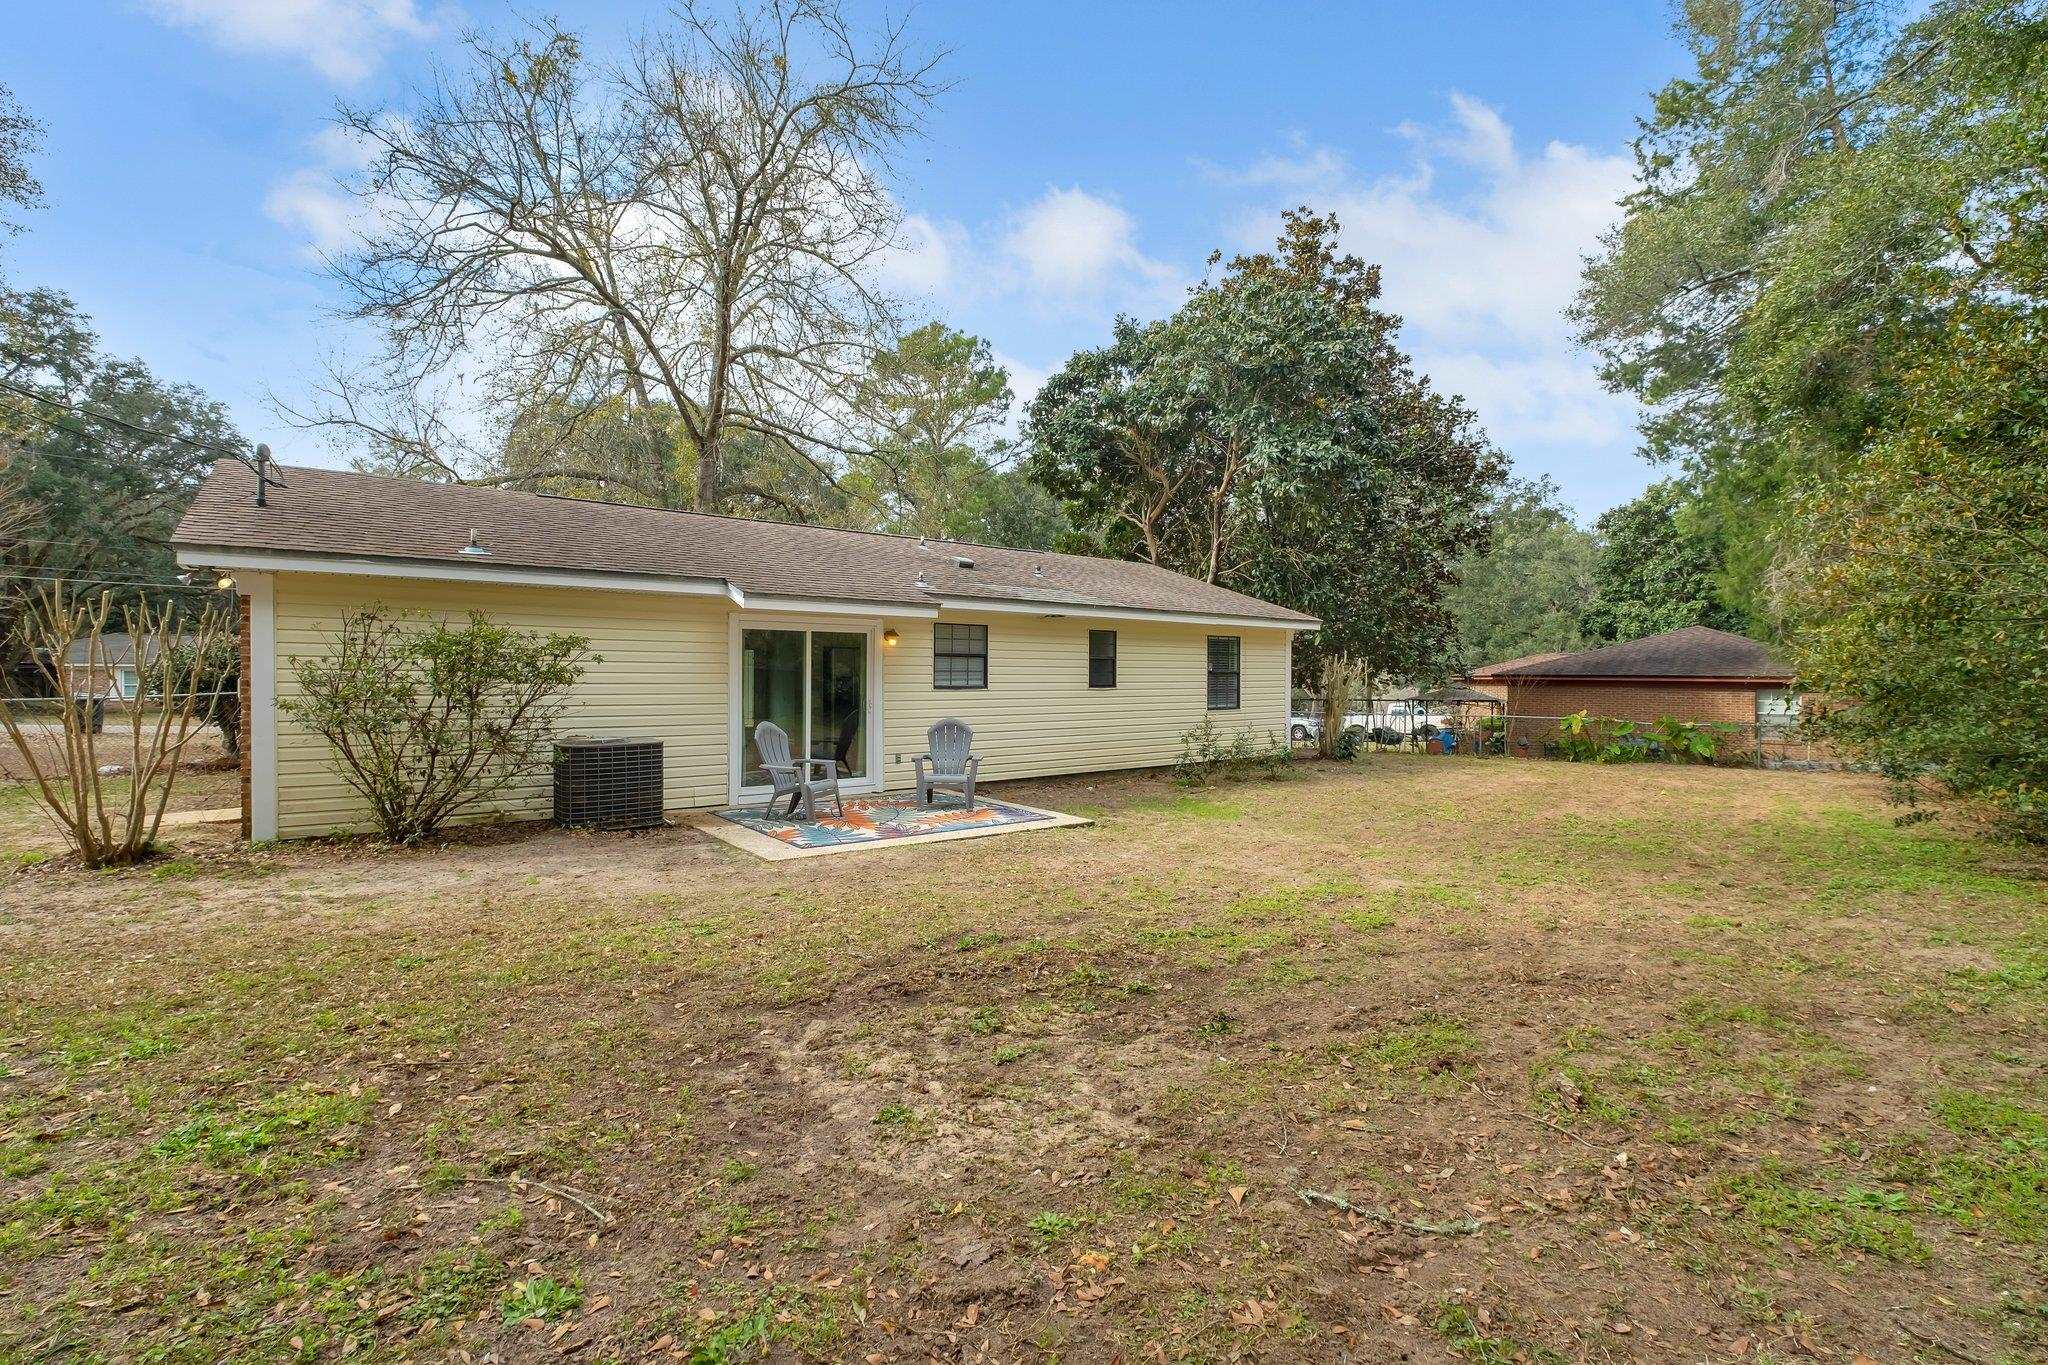 3720 Wood Hill Drive,TALLAHASSEE,Florida 32303,3 Bedrooms Bedrooms,2 BathroomsBathrooms,Detached single family,3720 Wood Hill Drive,367524